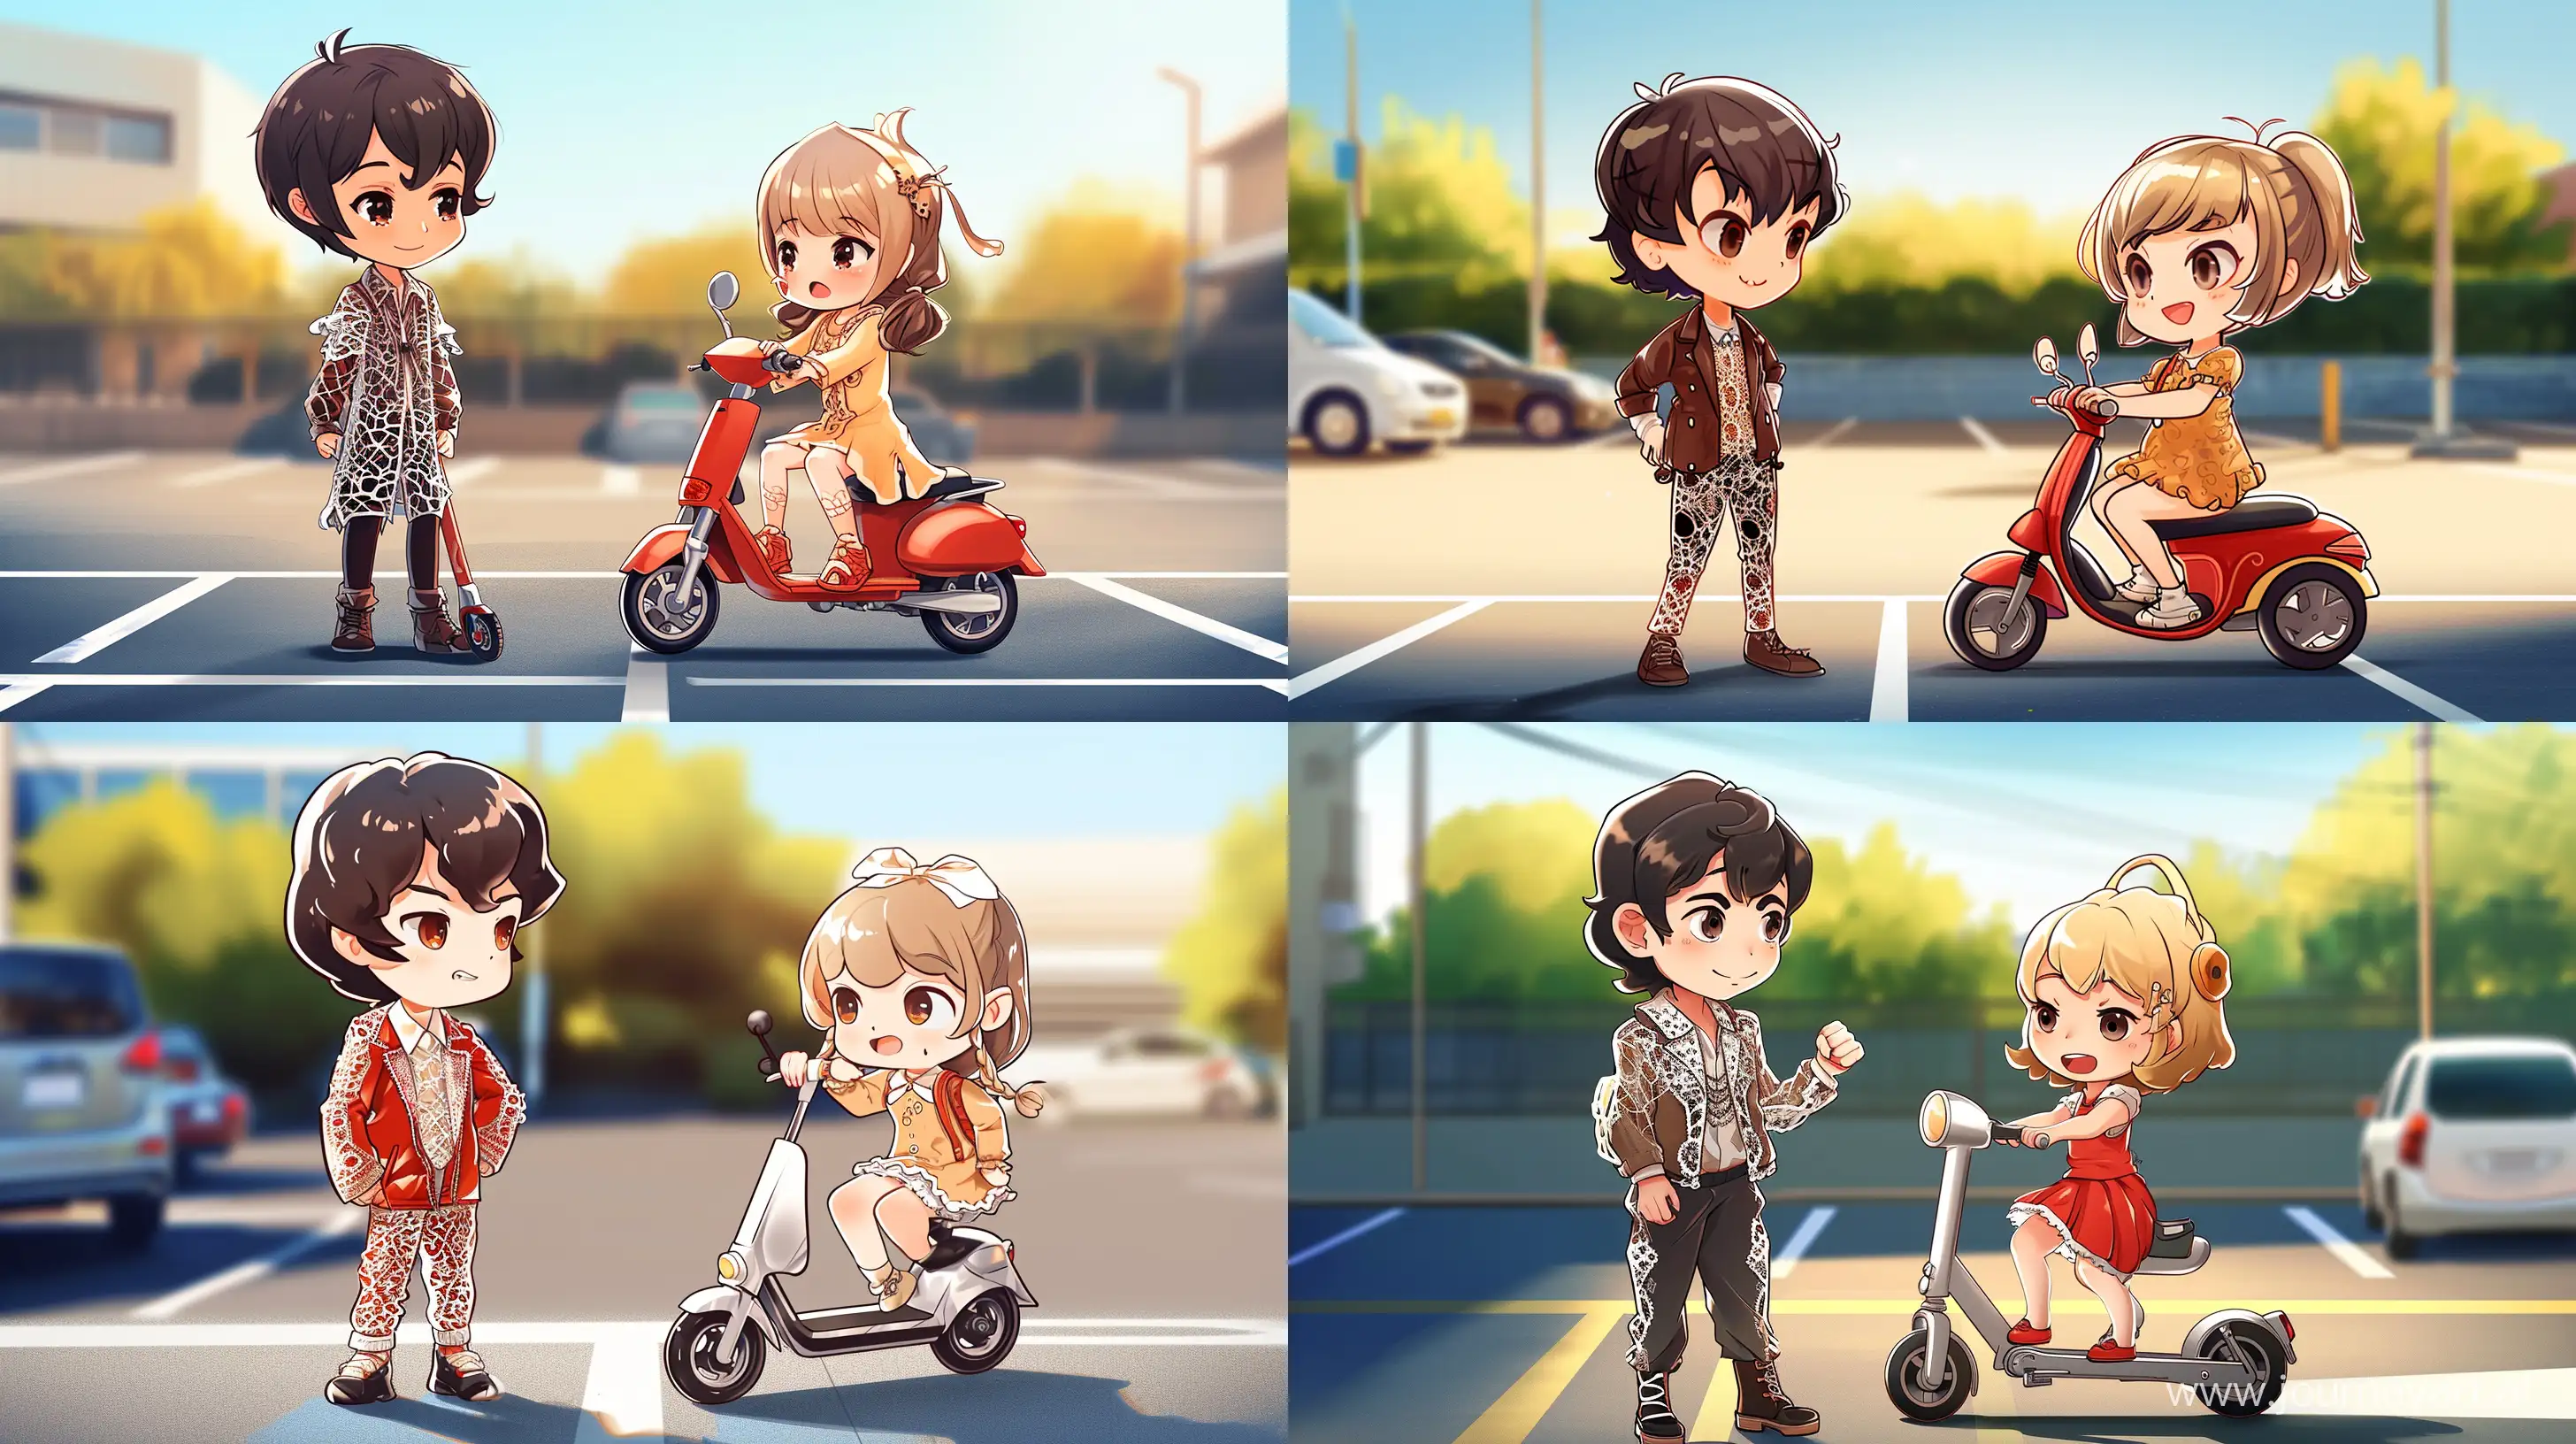 Chibi-Anime-Boy-and-Girl-with-Scooter-in-a-Playful-Parking-Scene